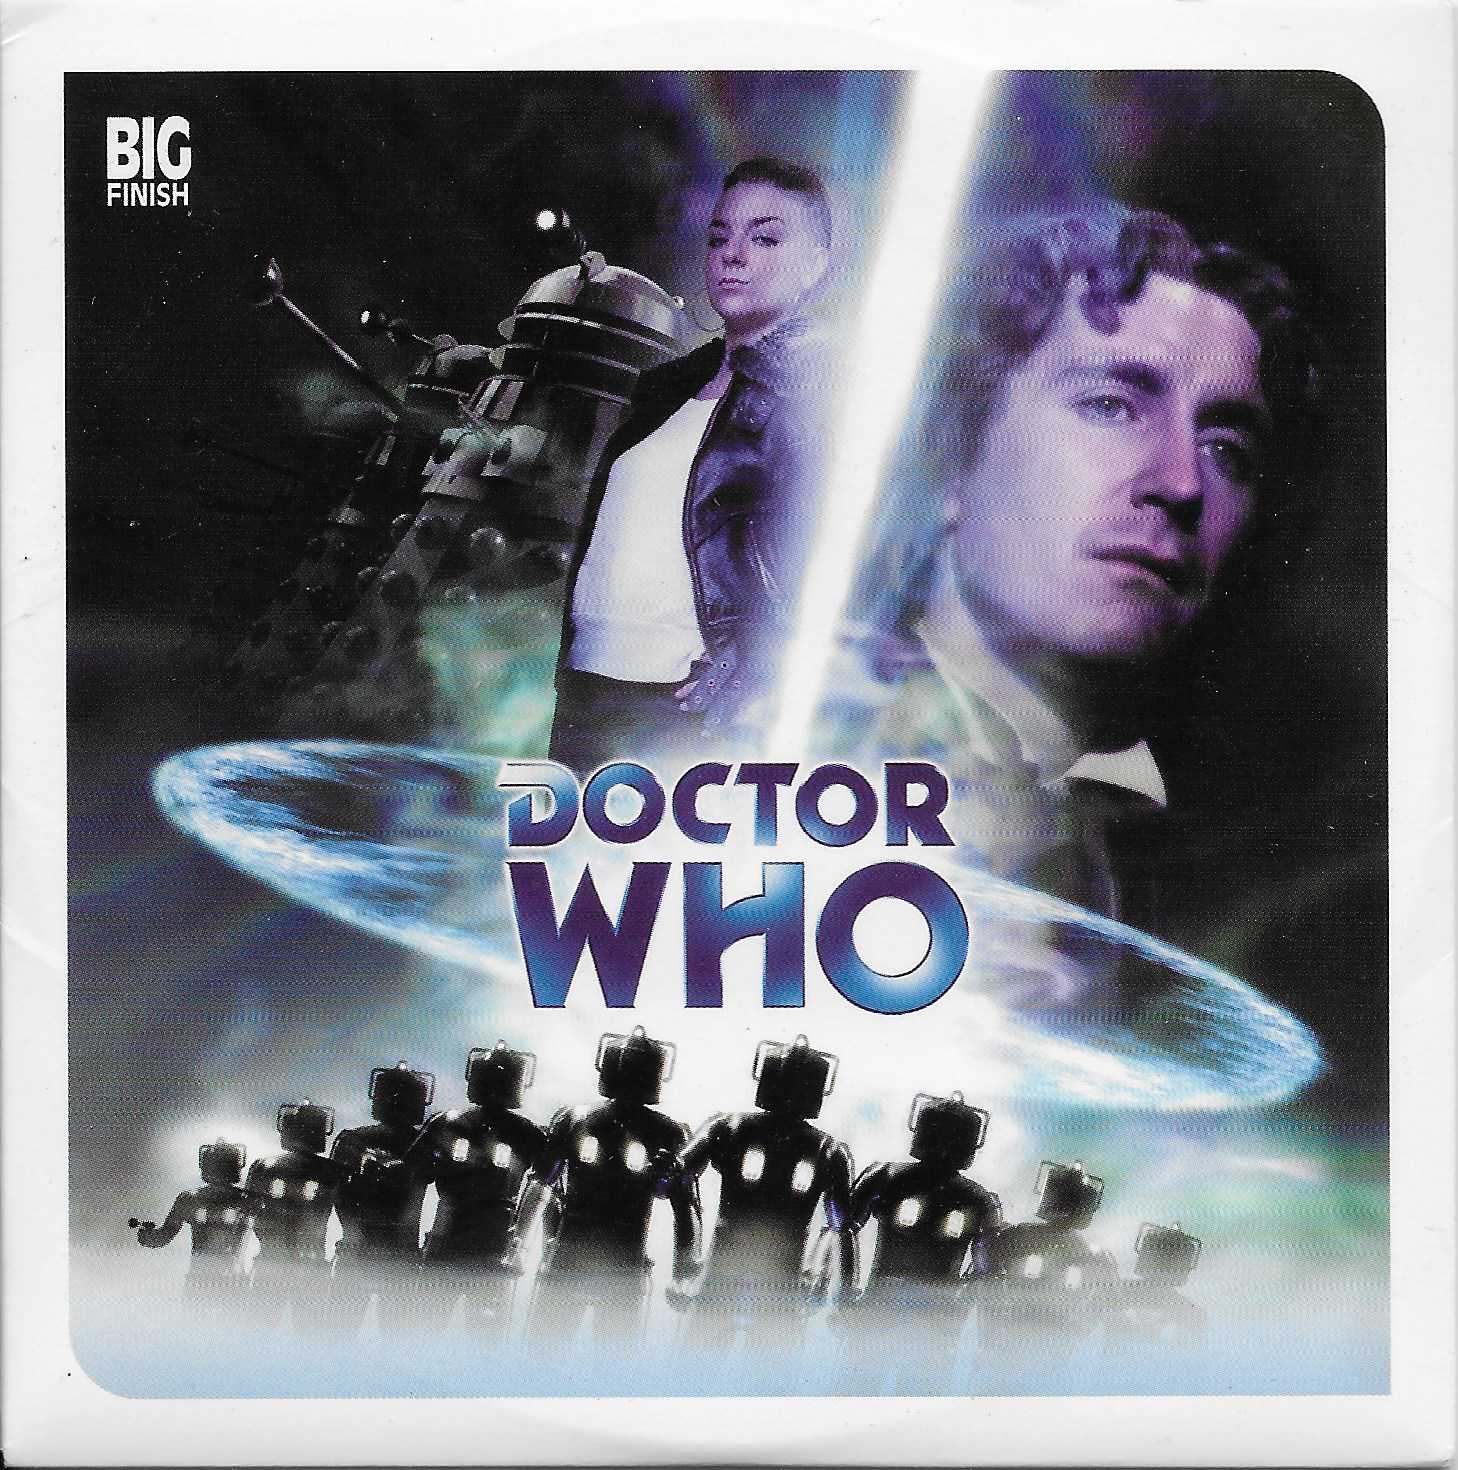 Picture of BFPDWMFREE07 Doctor Who - The eighth Doctor adventures by artist Various from the BBC records and Tapes library